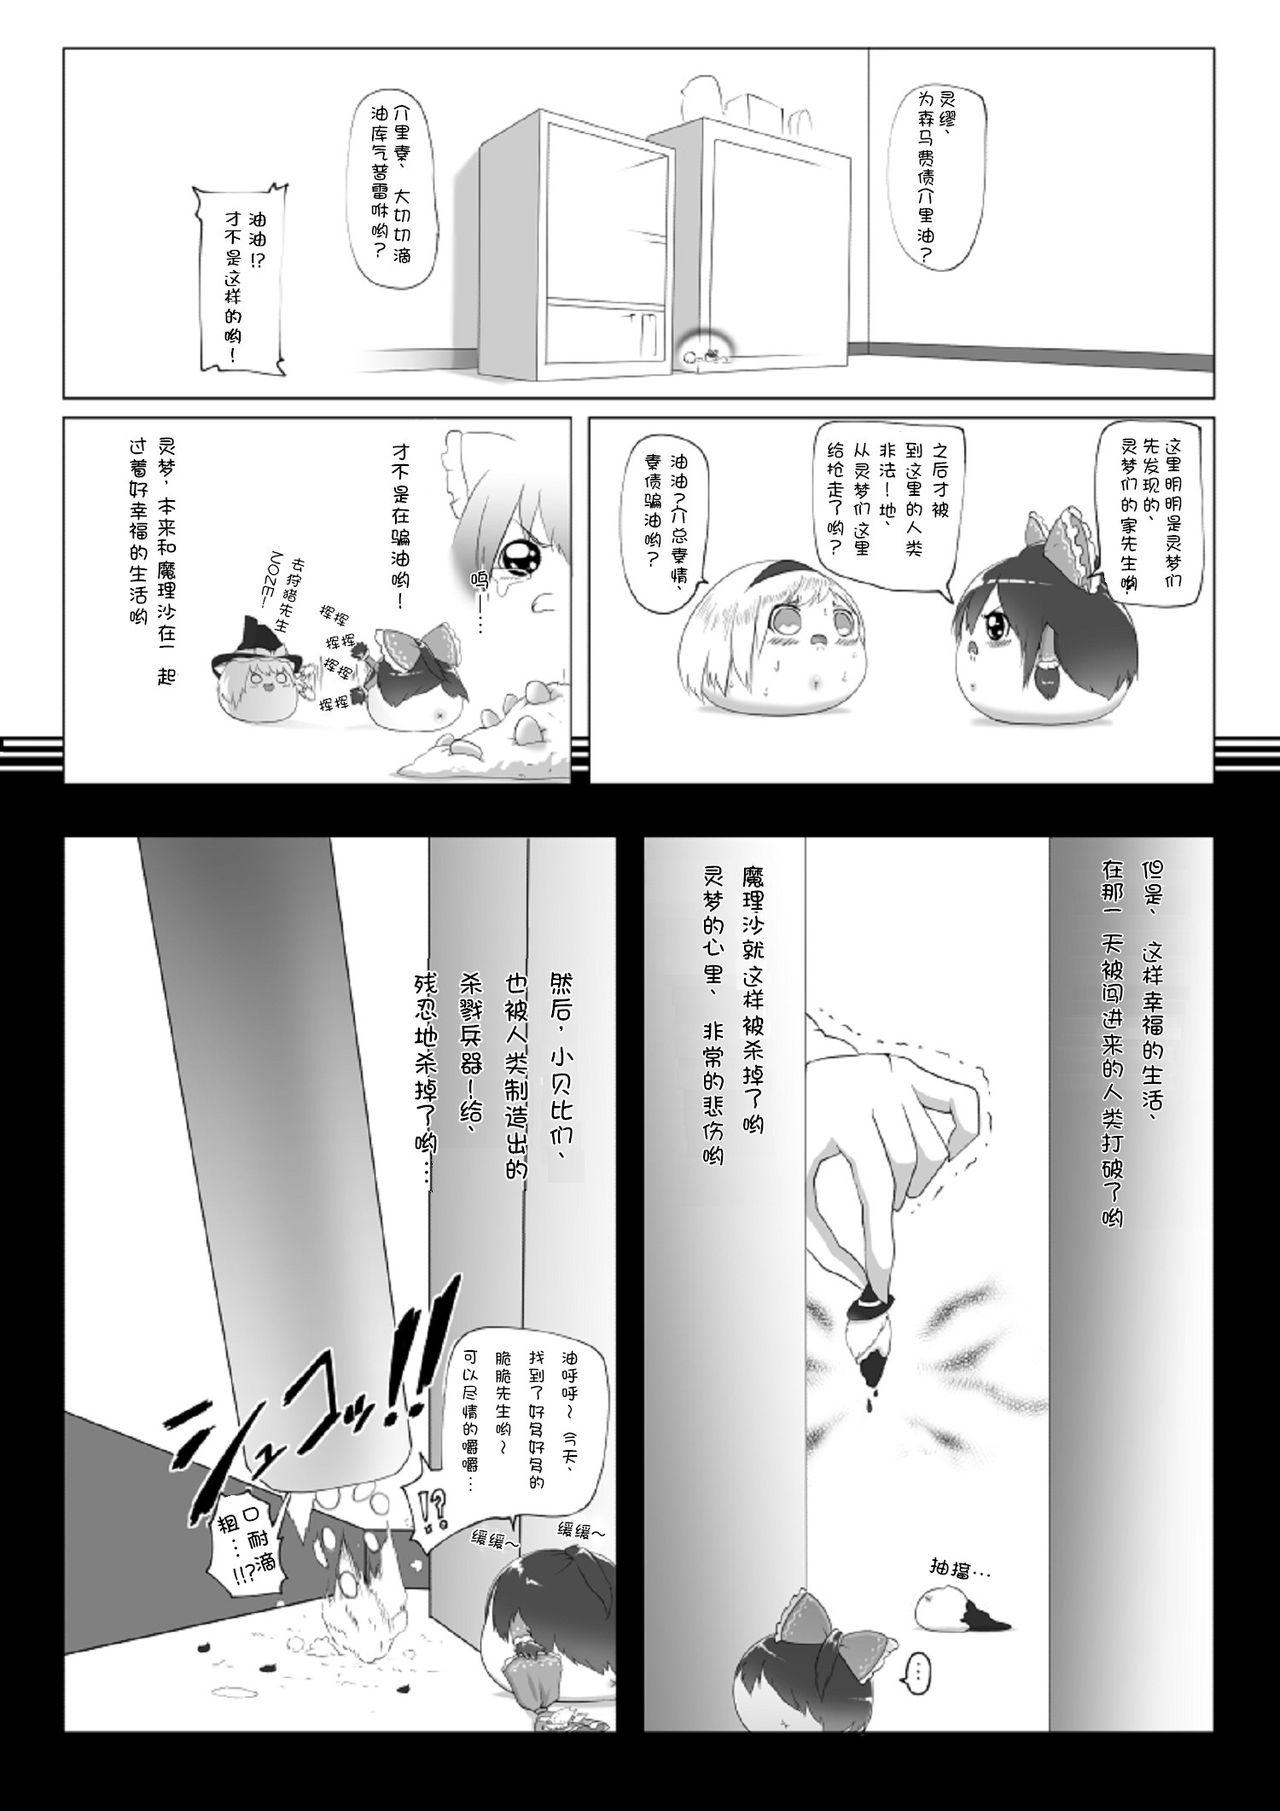 Load ゆっくりがかってにはえてくるわけ（Chinese) - Touhou project Gay Interracial - Page 5